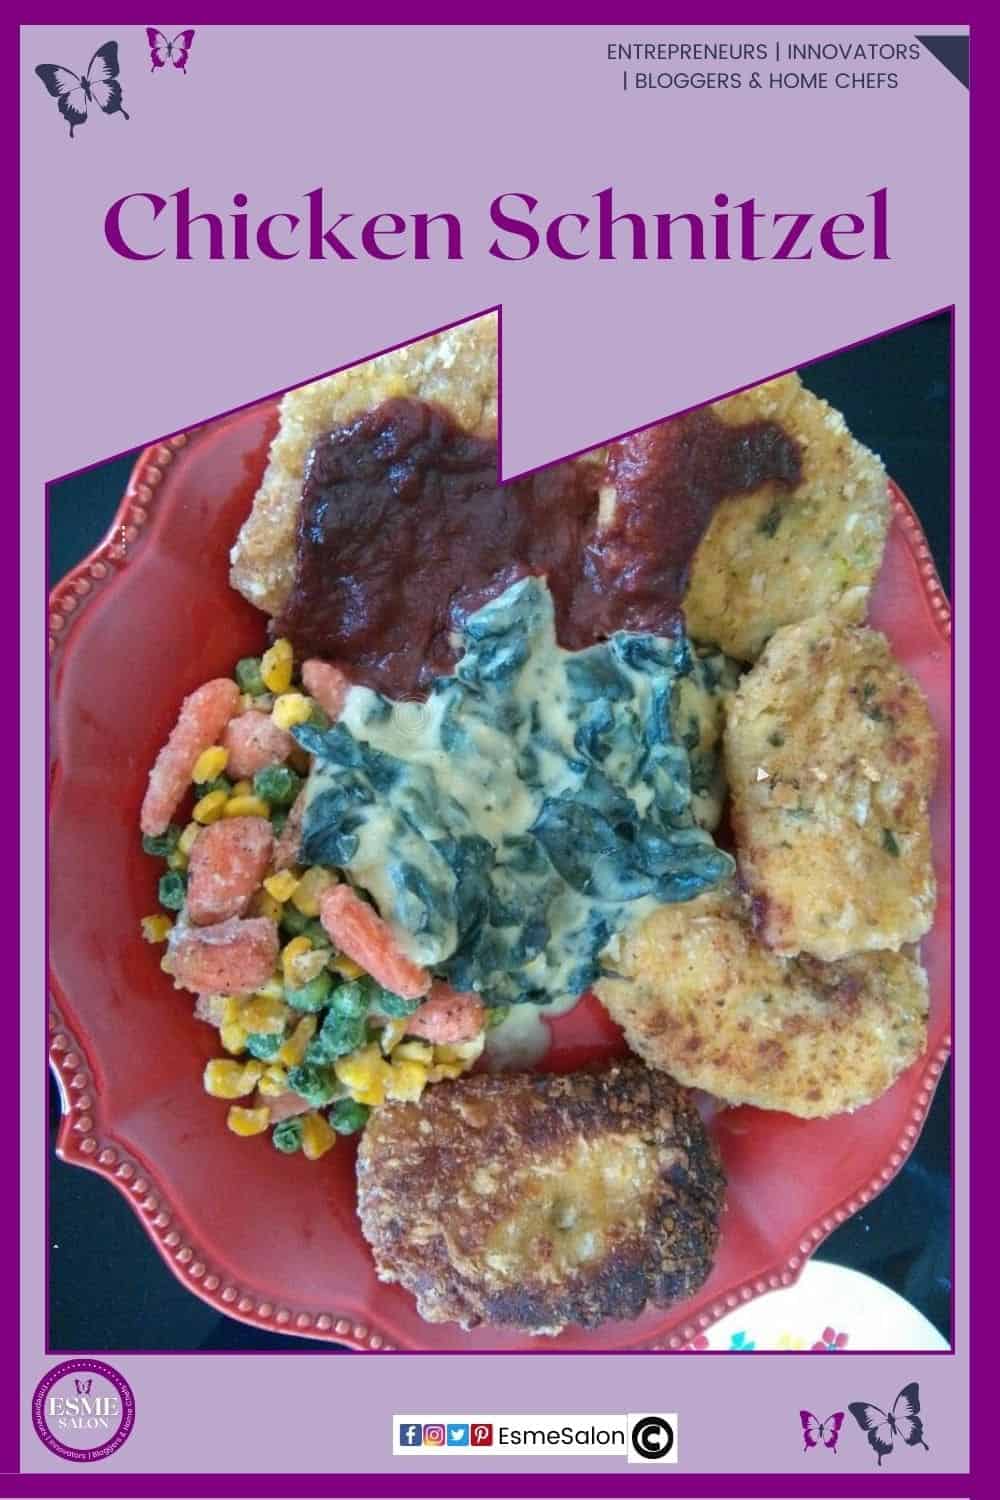 Chicken Schnitzel with Cheesy Potato Patties, Creamed Spinach And Mixed Frozen Veggies